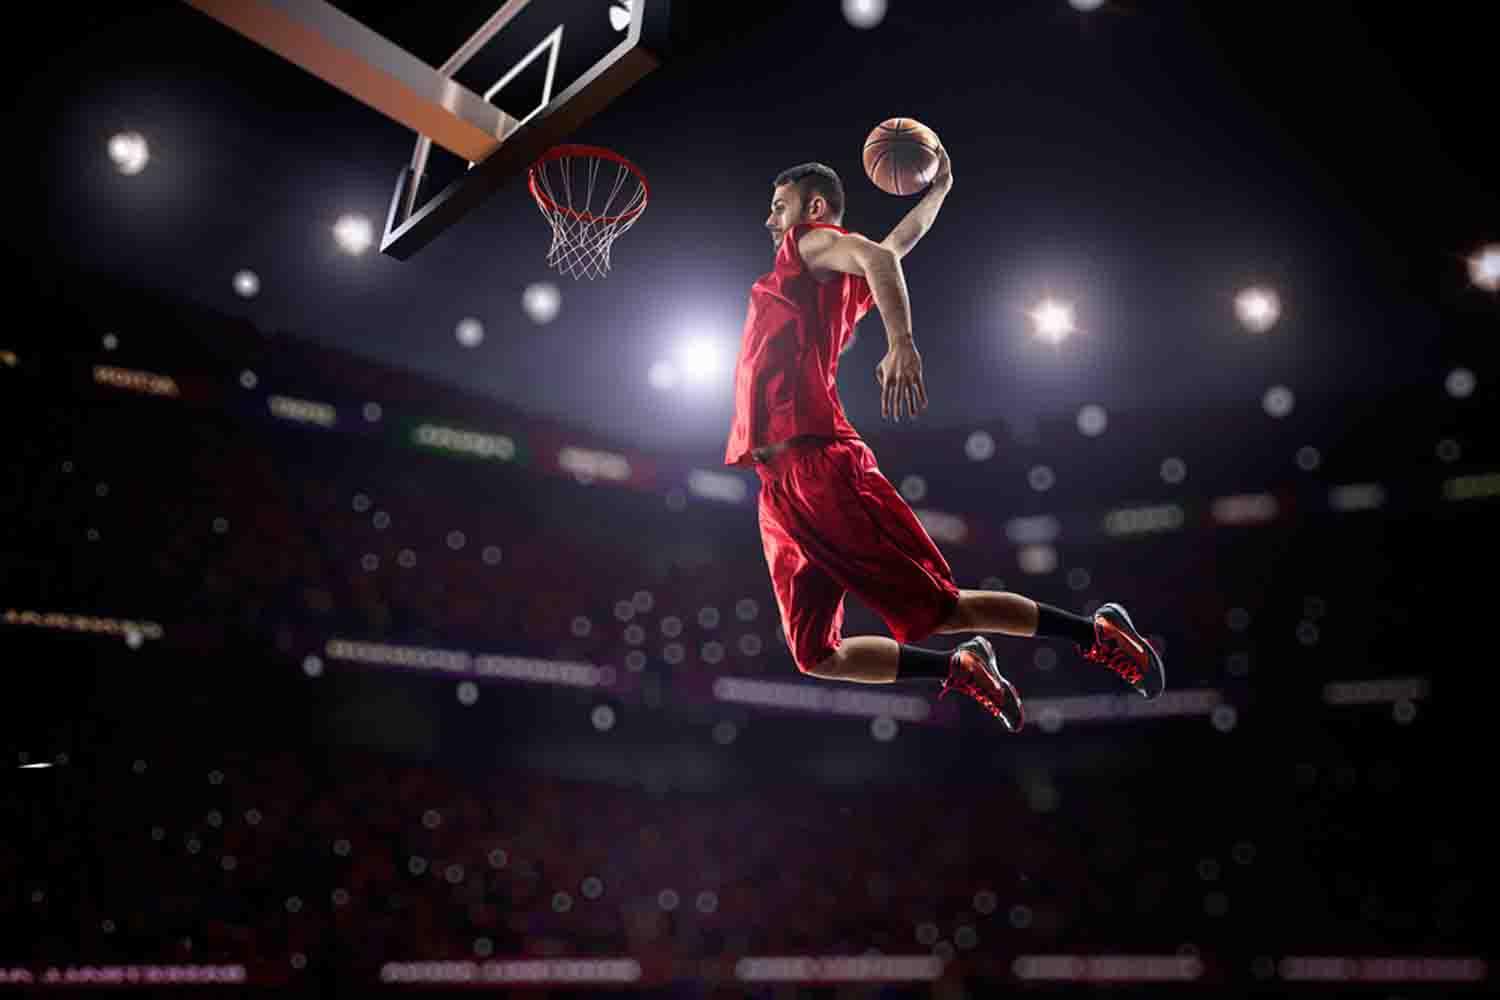 Basketball Wallpaper APK Download - Free Personalization APP for ...